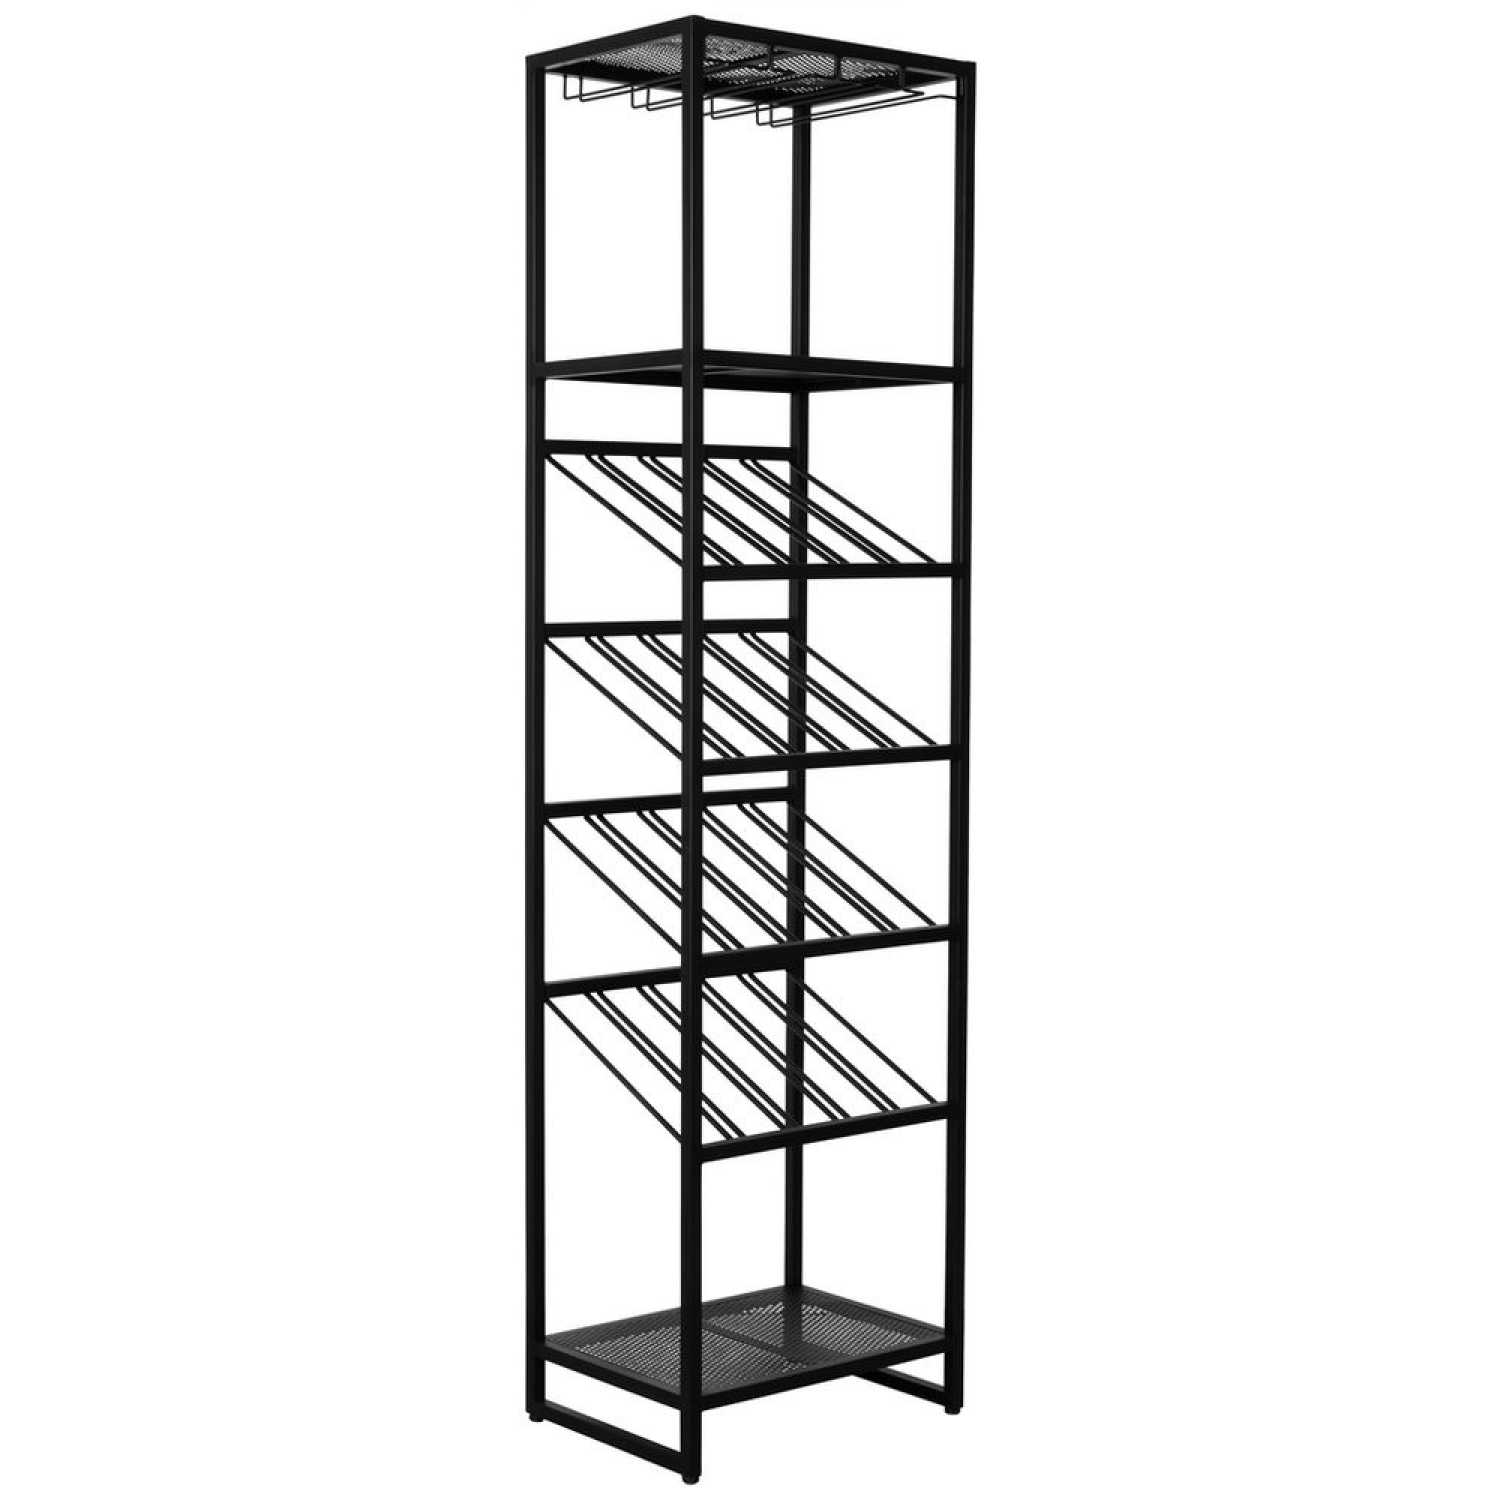 Zuiver Cantor S Wine Shelving Unit